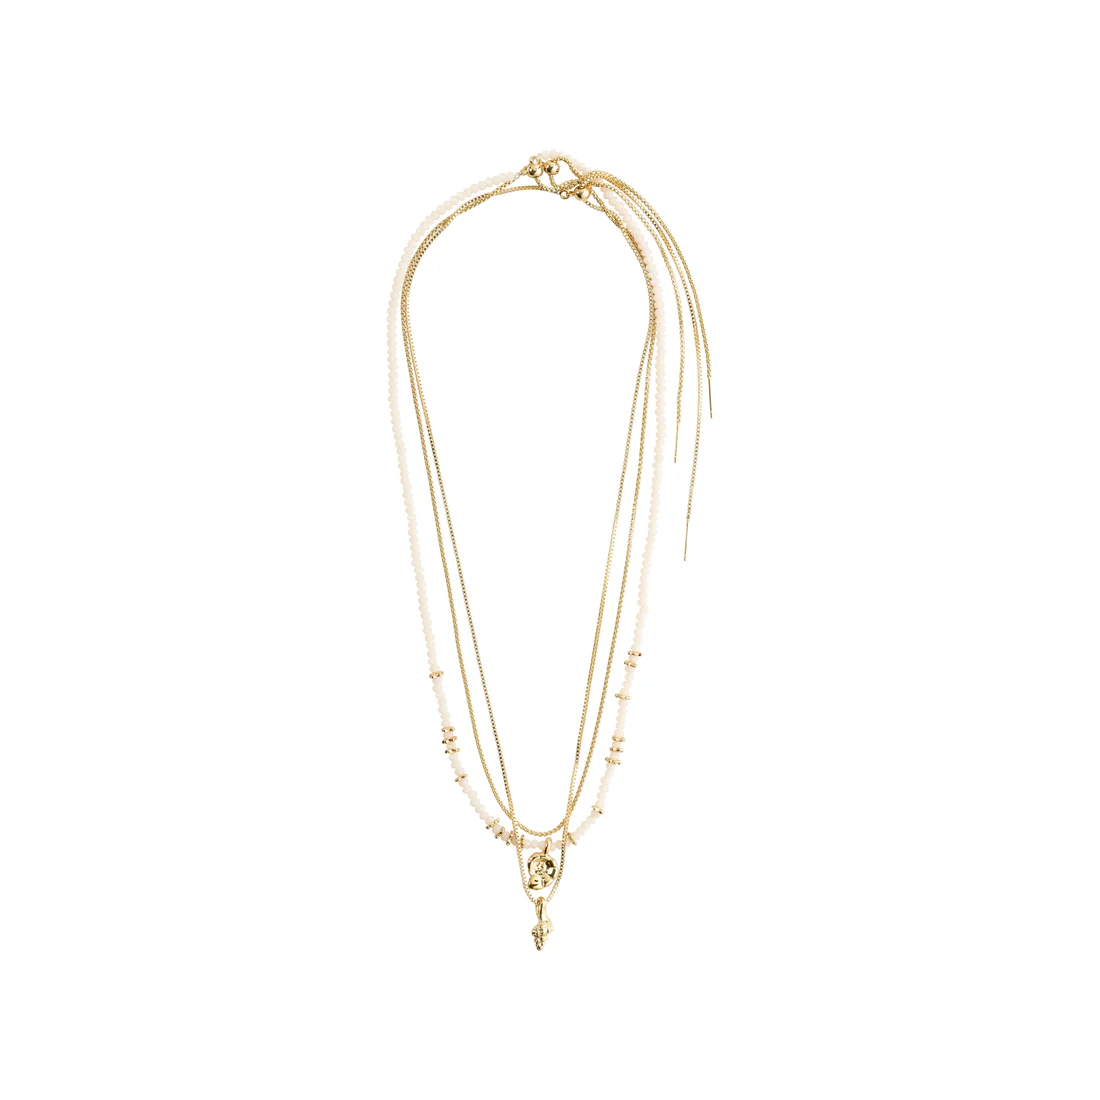 Pilgrim Sea Necklace 3-in-1 - Gold Accessories - Jewelry - Necklaces by Pilgrim | Grace the Boutique